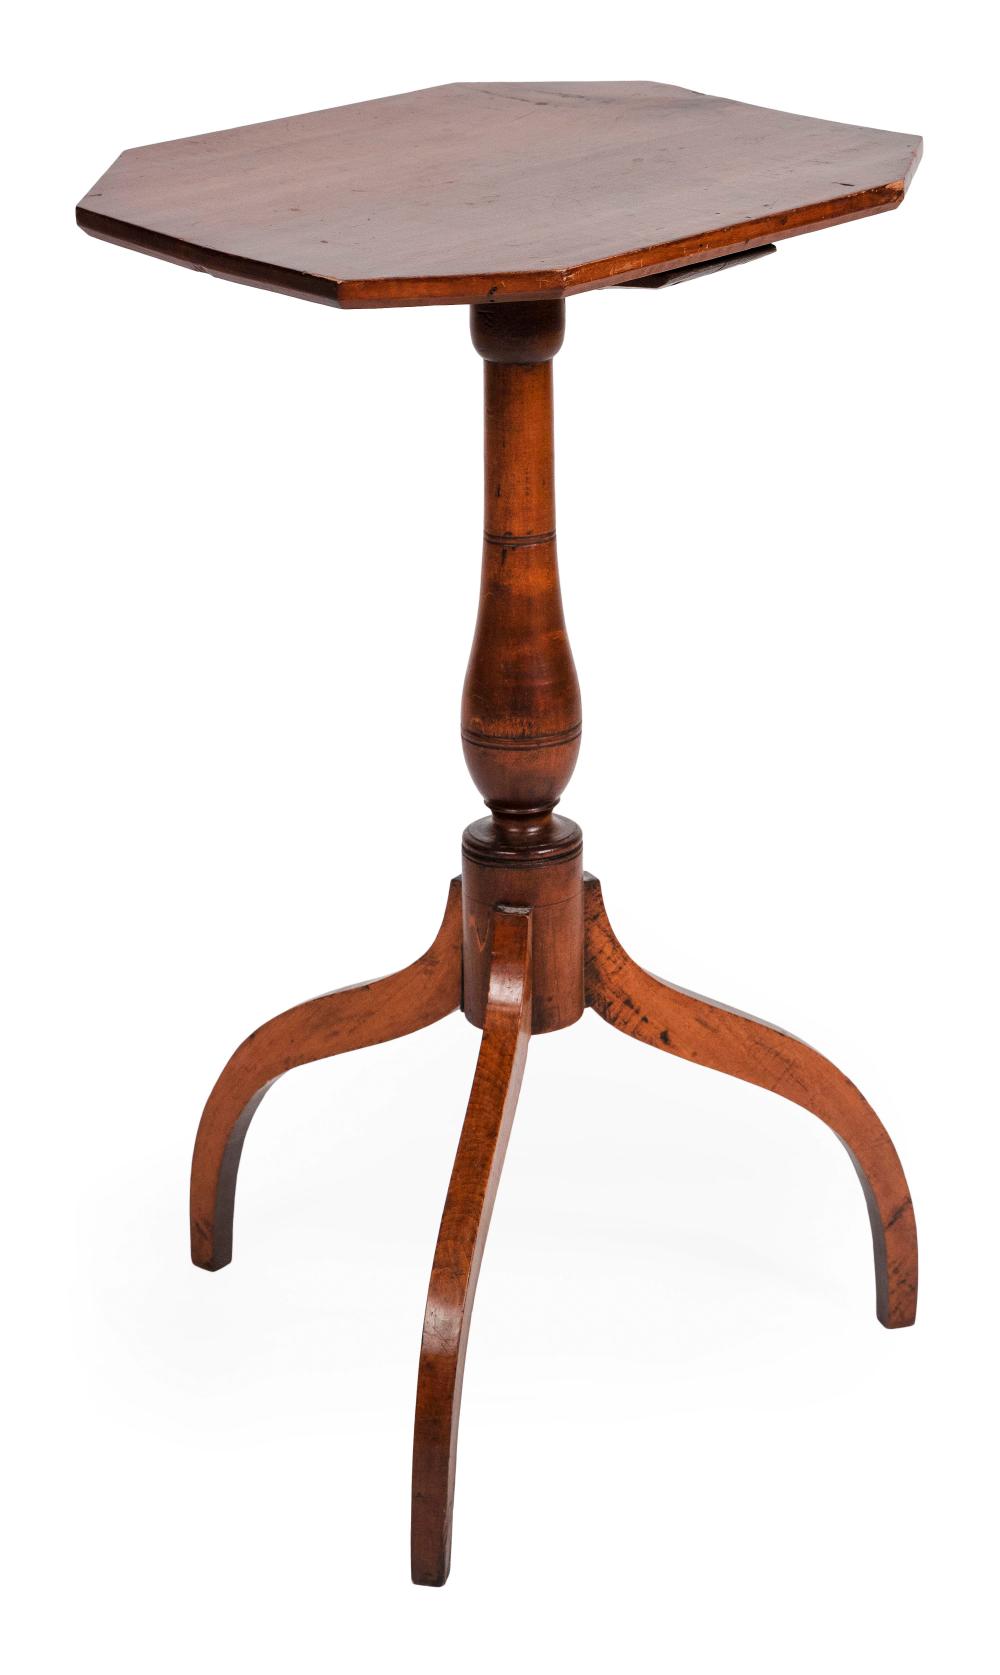 CANDLESTAND EARLY 19TH CENTURY 34f73a